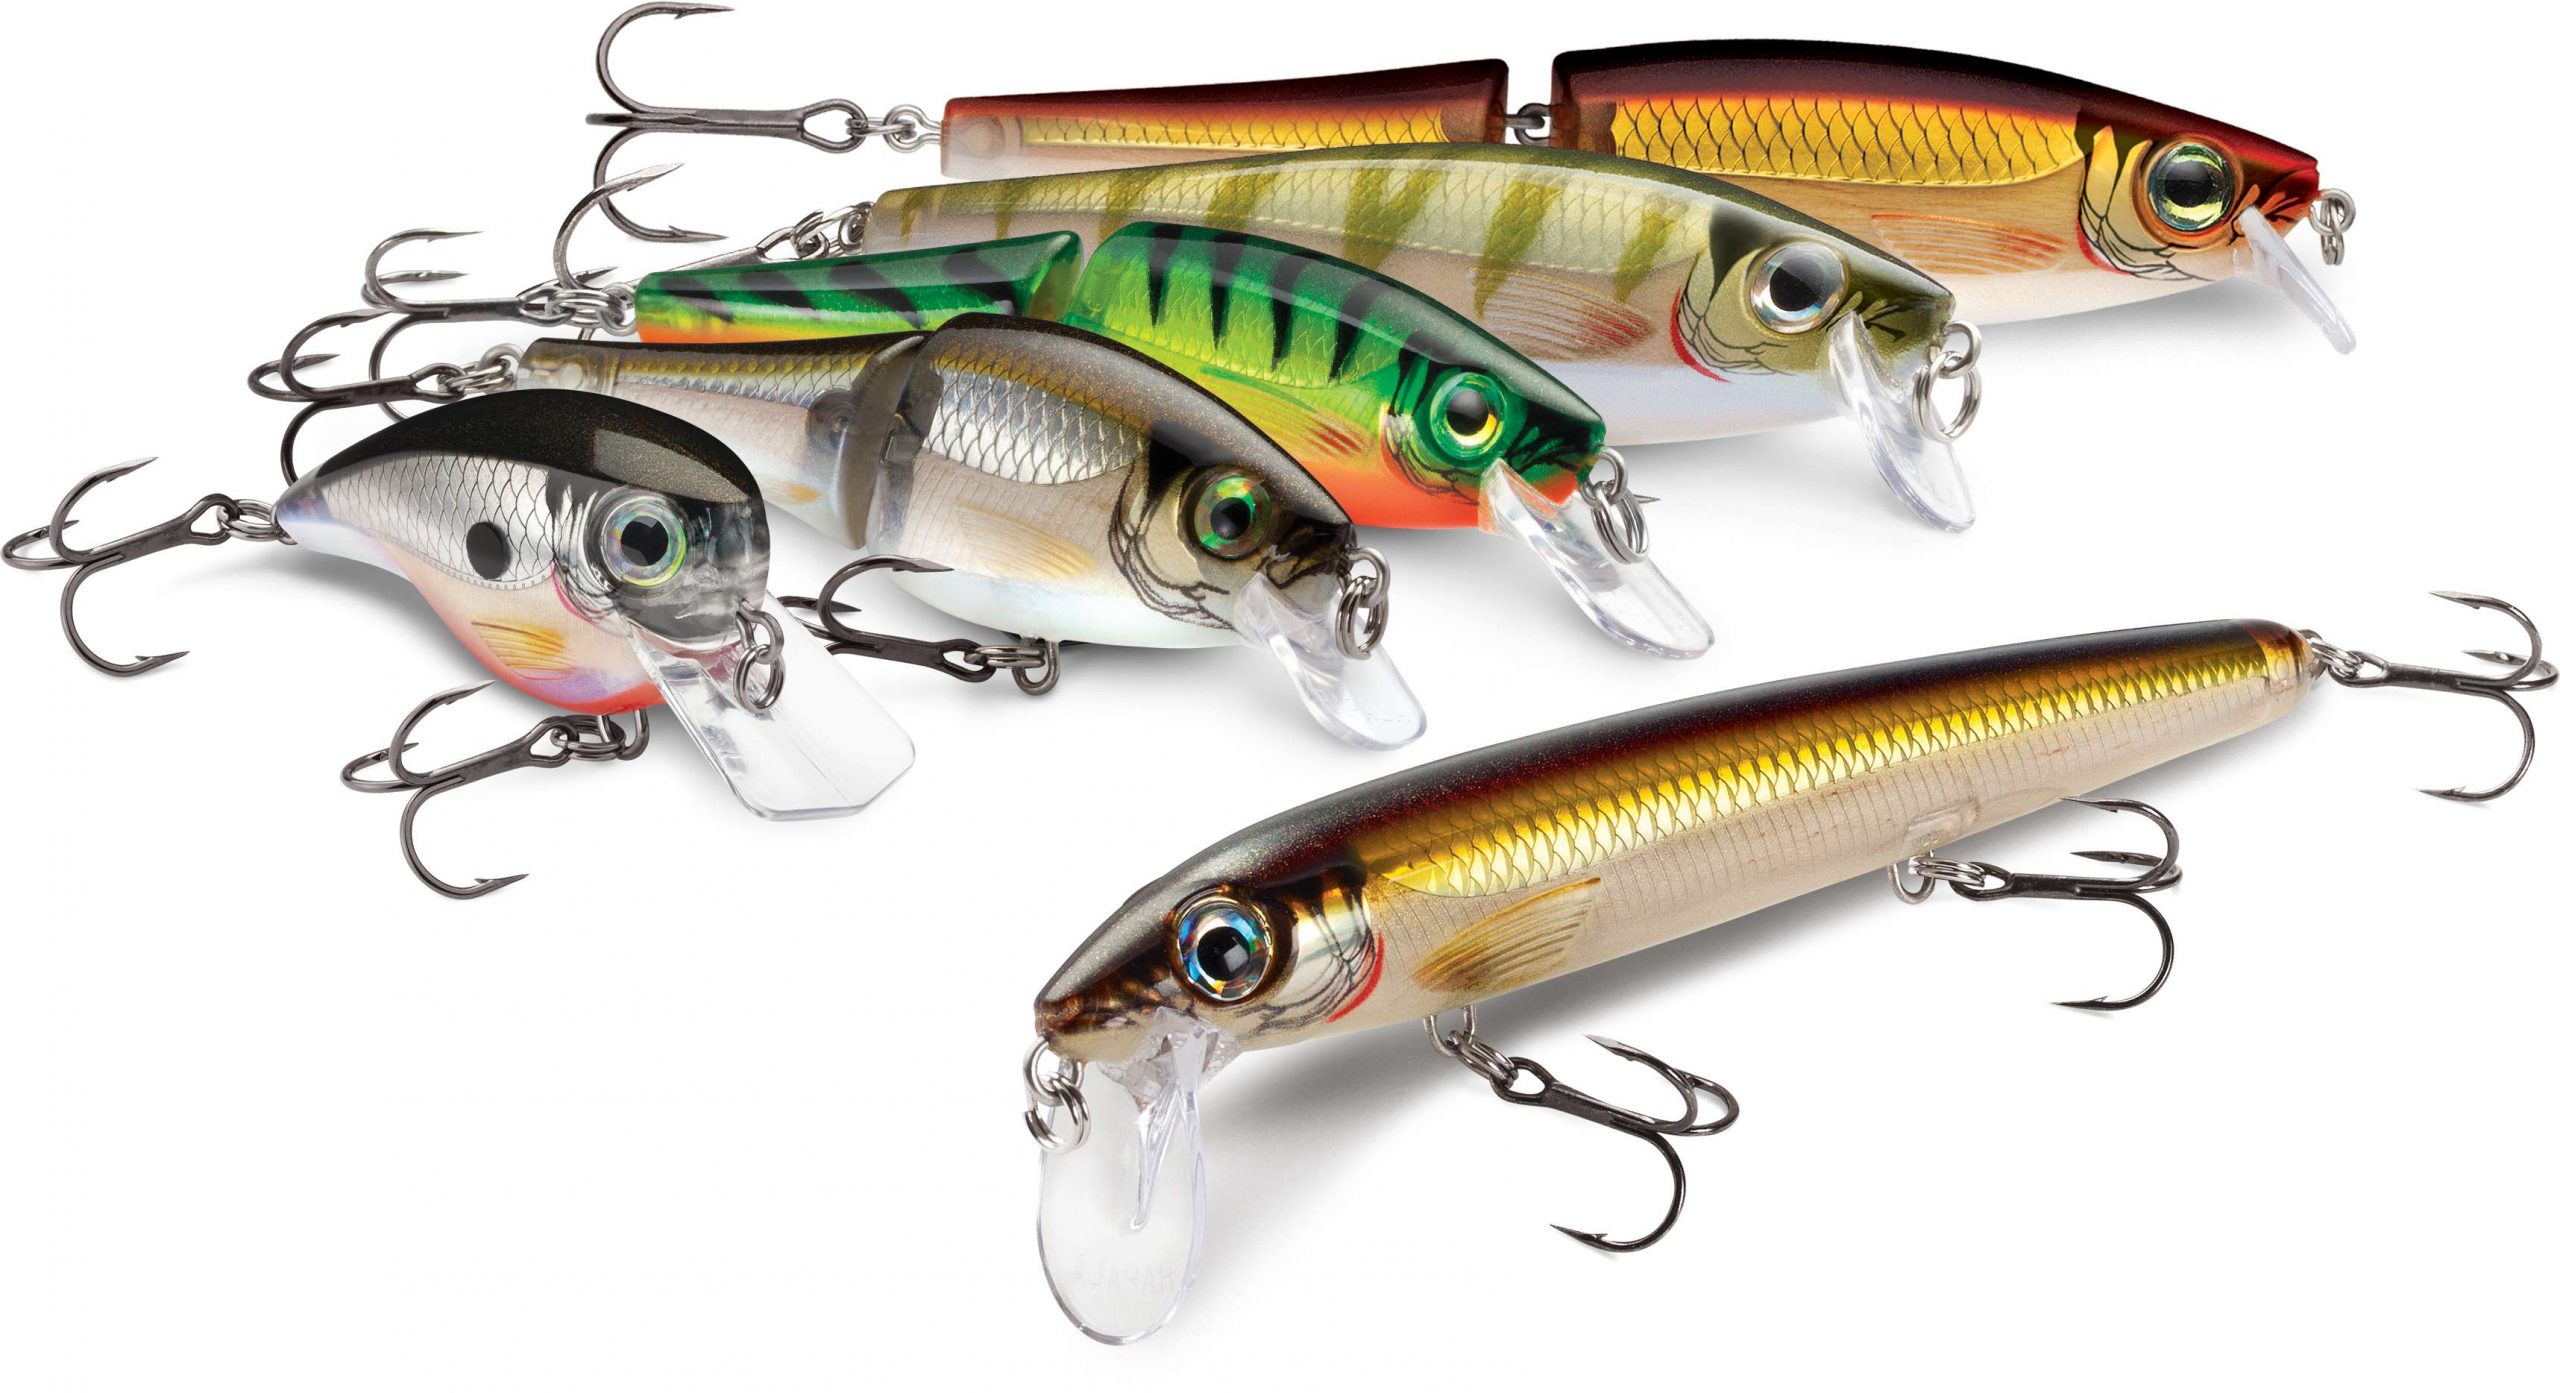 Hand-tuned and tank-tested tackle - Bassmaster